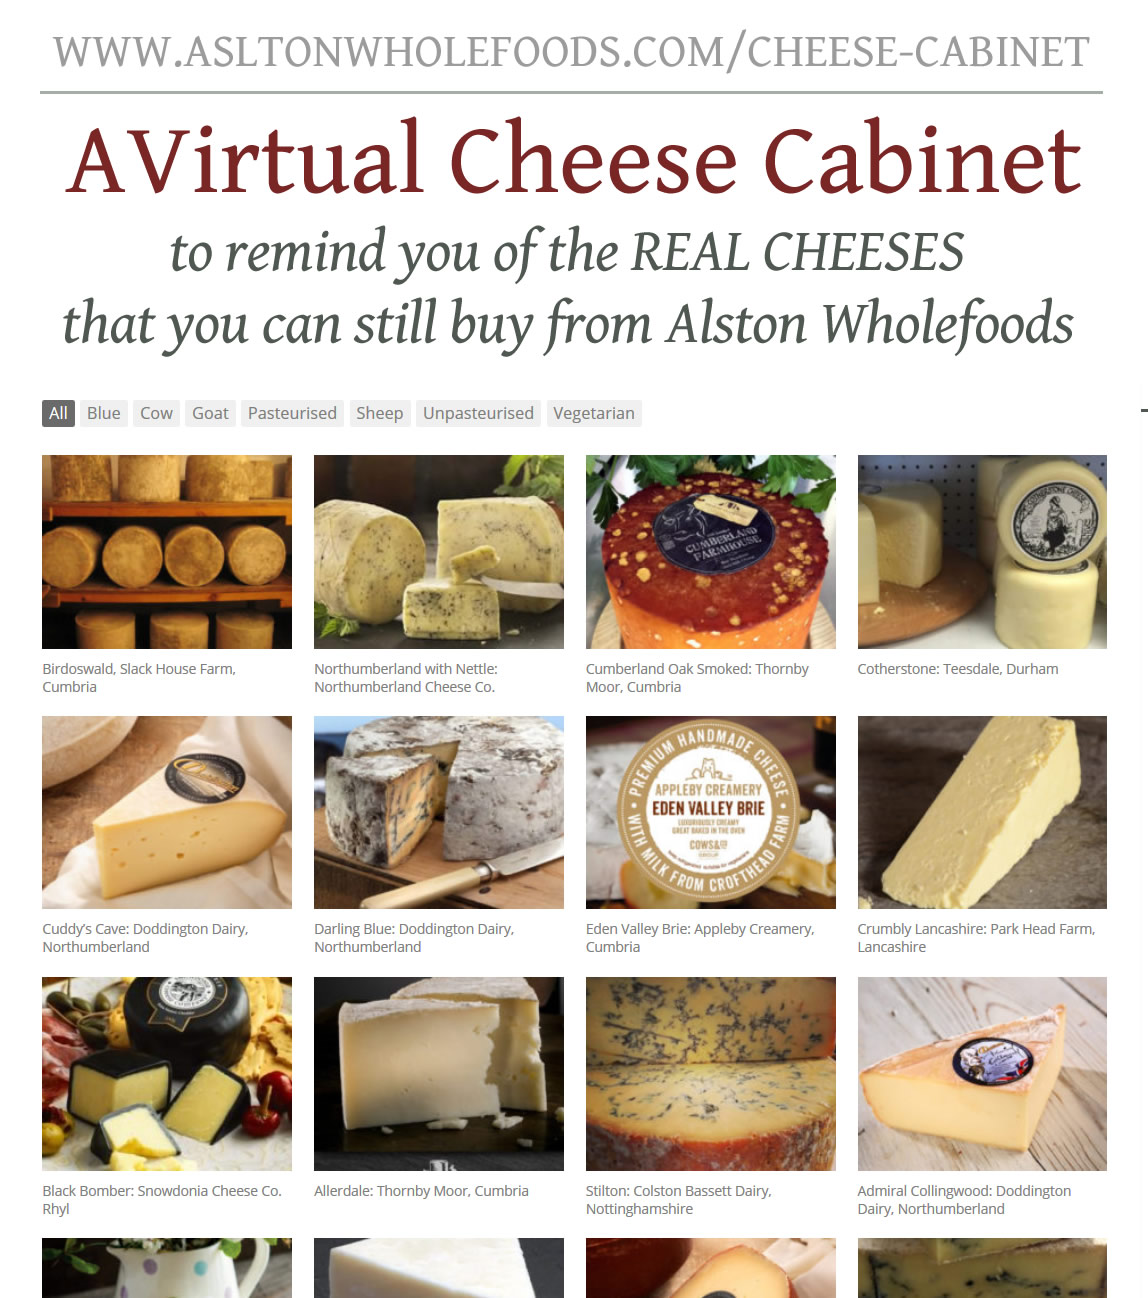 Our Virtual Cheese Cabinet